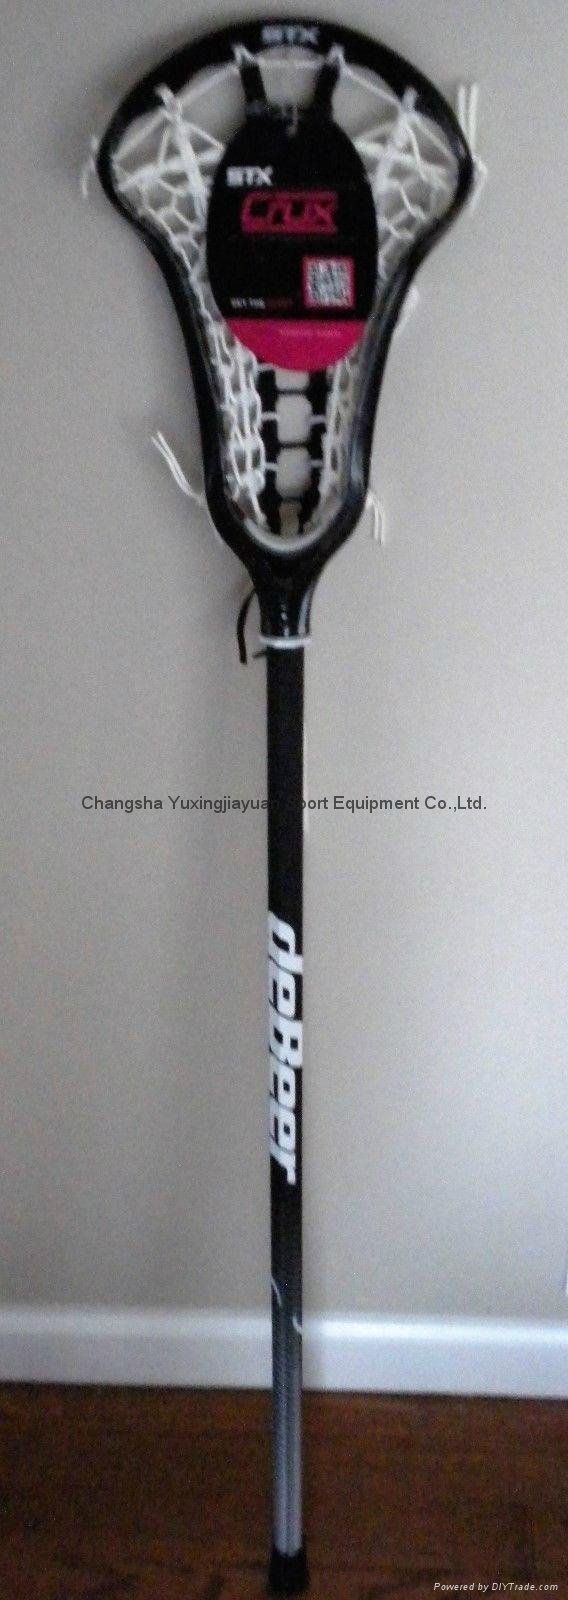 New Womens Lacrosse Stick STX Crux Head with Debeer Composite feel Shaft Girls  4